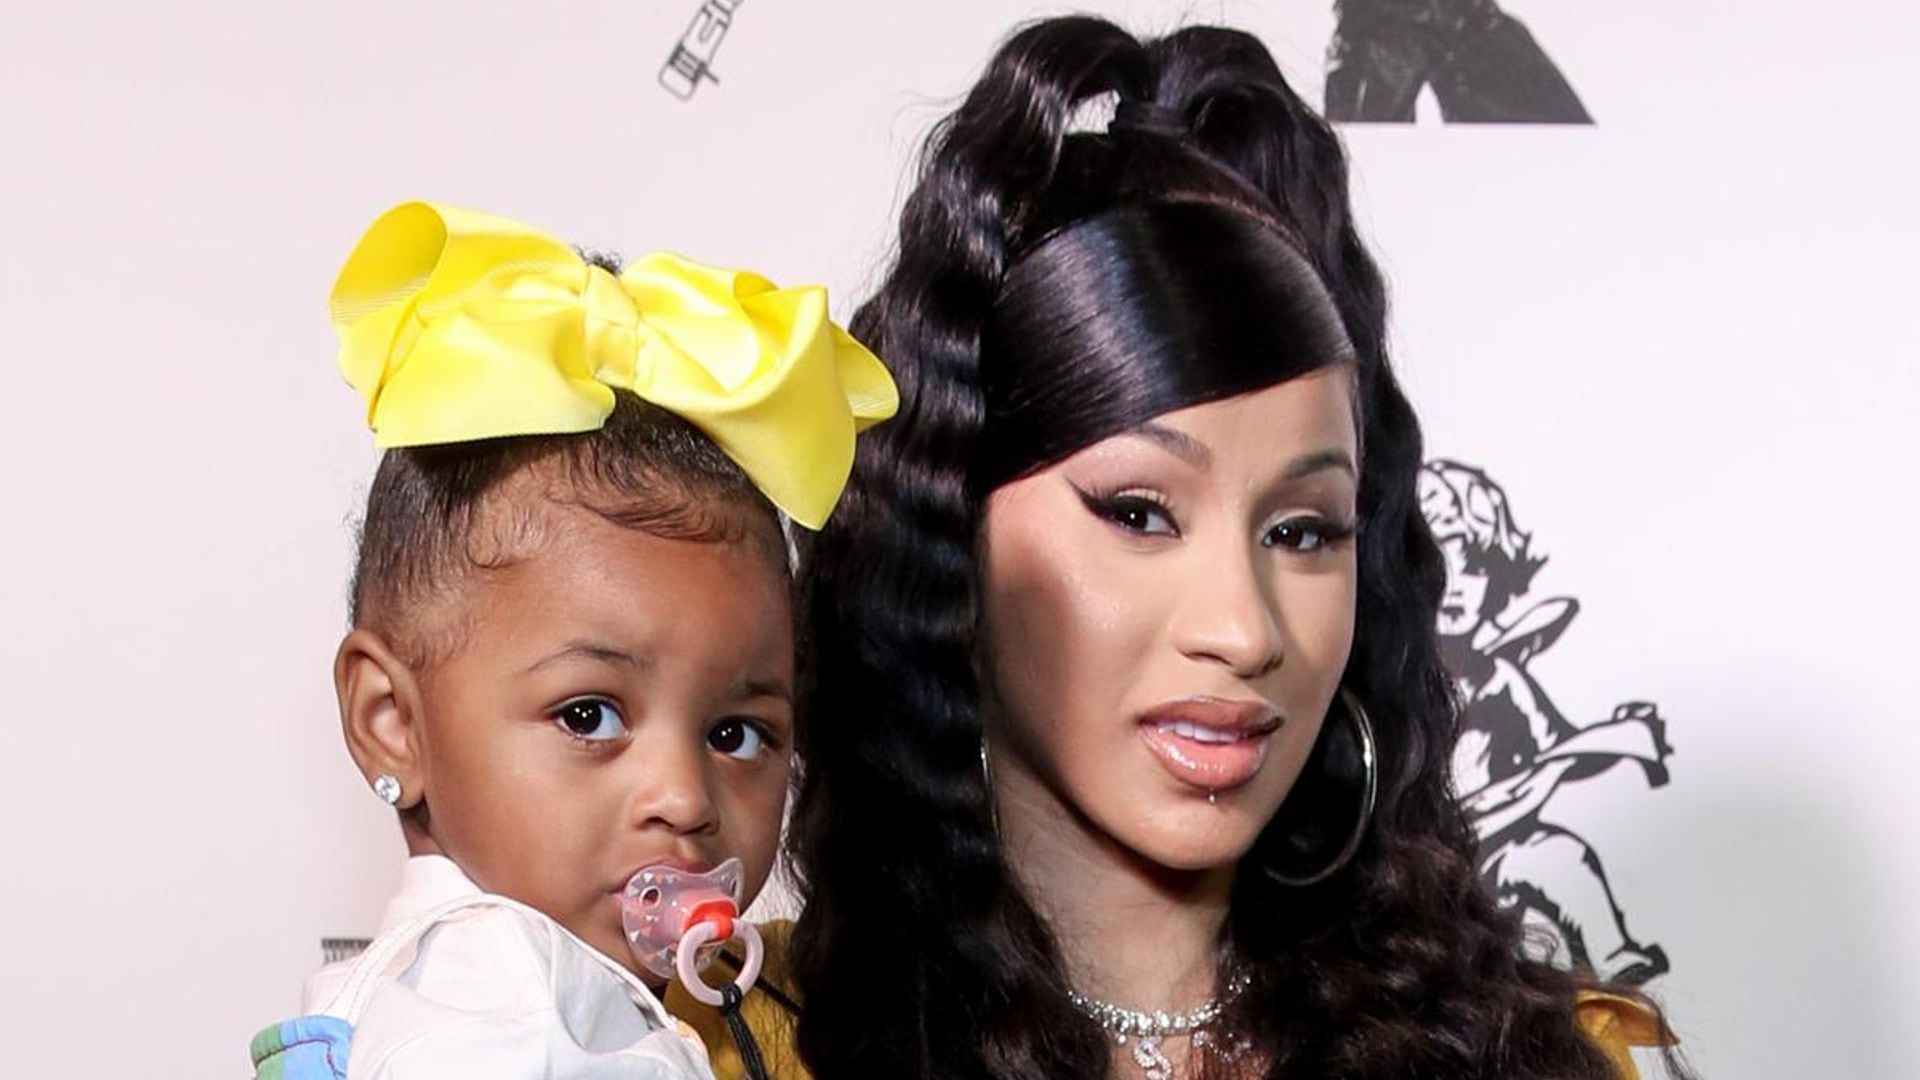 Cardi B responds to a person claiming her daughter Kulture is autistic